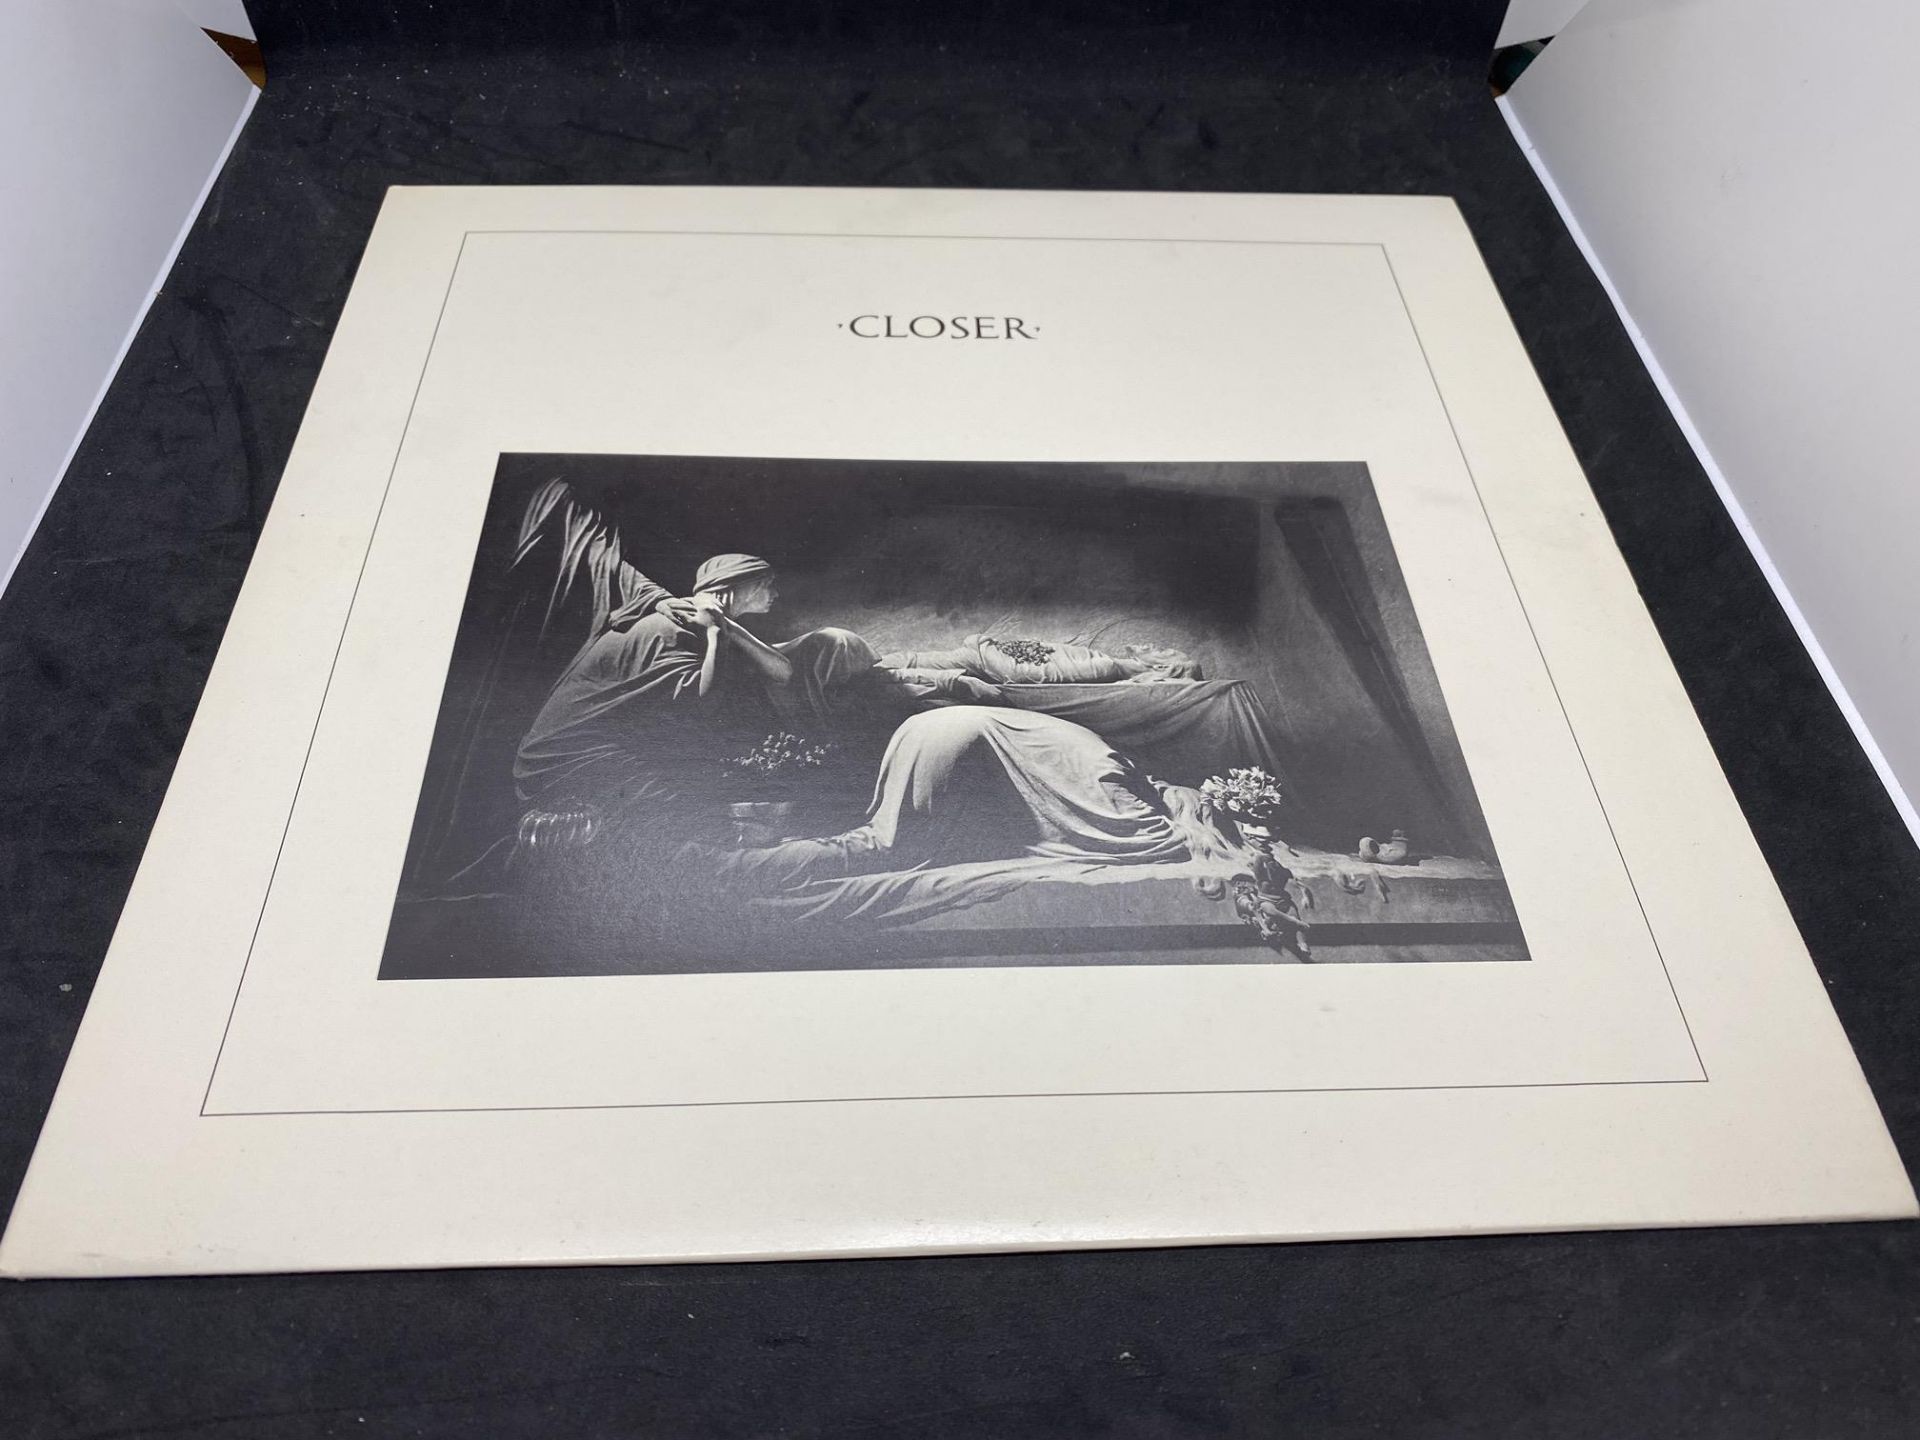 JOY DIVISION - CLOSER ALBUM - FROM PRIVATE COLLECTION